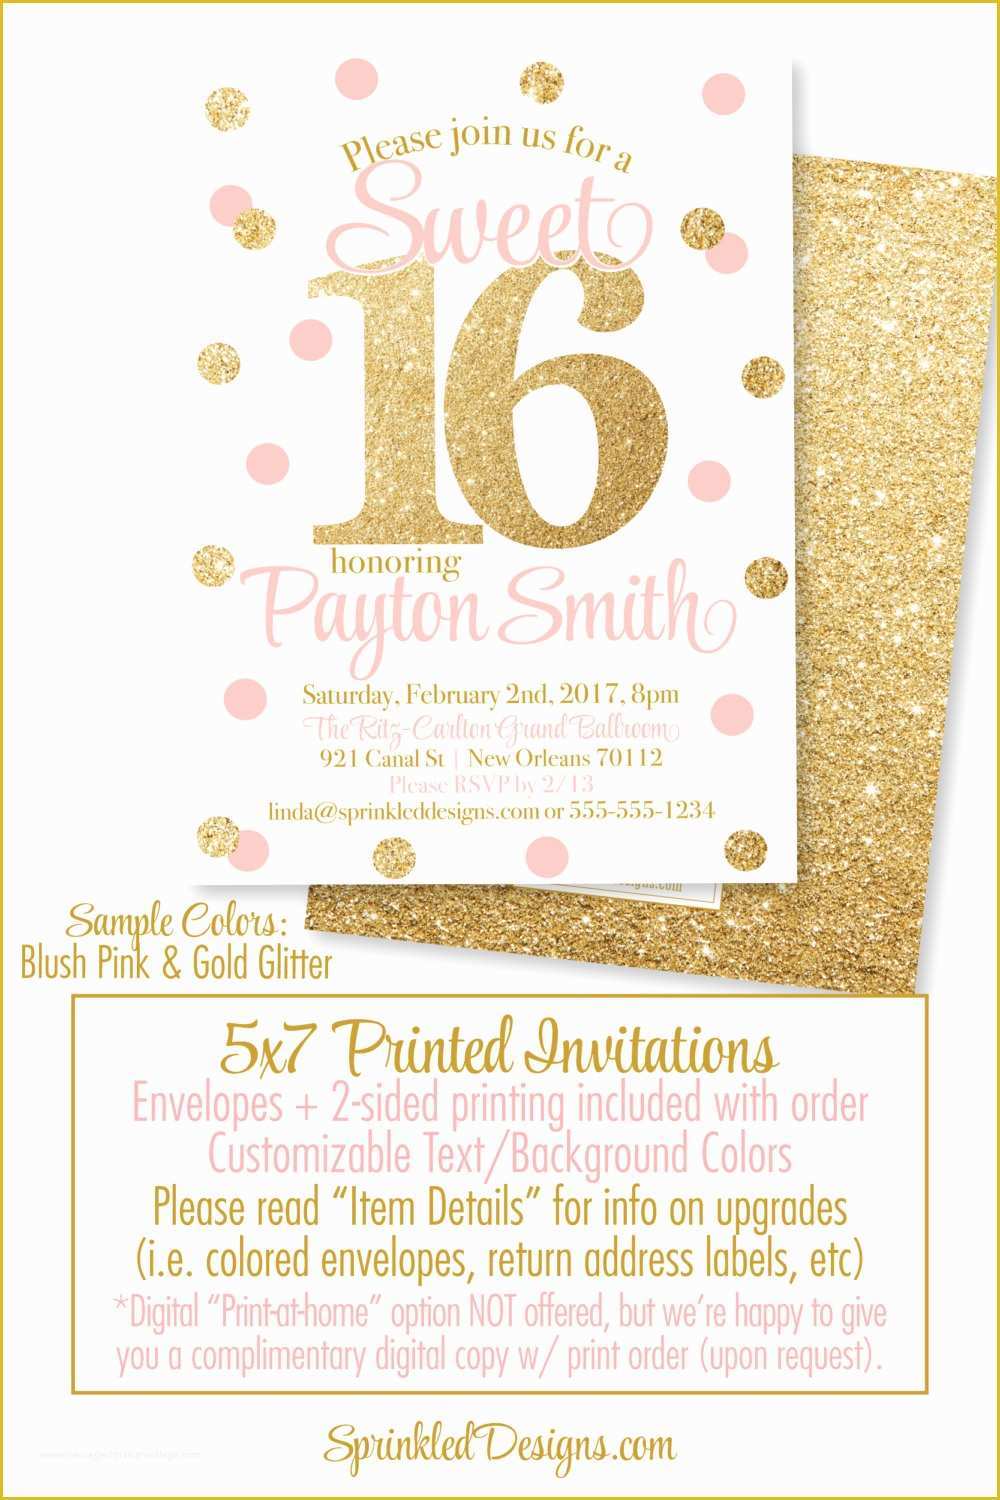 Sweet 16 Invitations Templates Free Of Sweet 16 Invitations Pink and Gold Glitter Sweet Sixteen